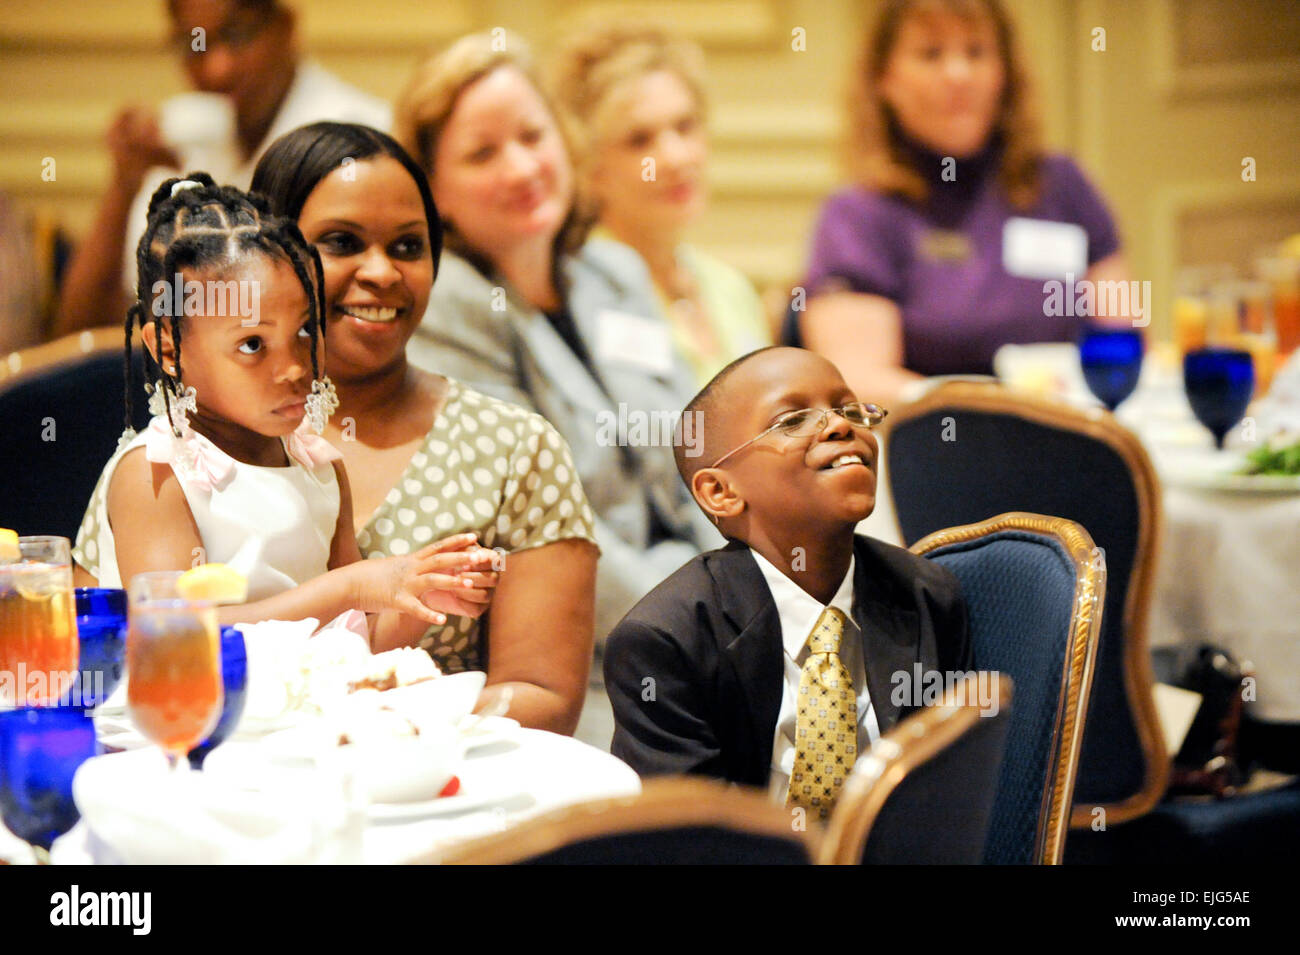 Willie Banks III, right, attends a luncheon in Crystal City, Va., April 8, where he was recognized as the 2010 Operation Homefront Military Child of the Year, while his mother, Felicia, and his younger sister Lynn look on.         Military Child of Year learns life lessons from late father   /-news/2010/04/30/38245-military-child-of-year-learns-life-lessons-from-late-father/index.html Stock Photo